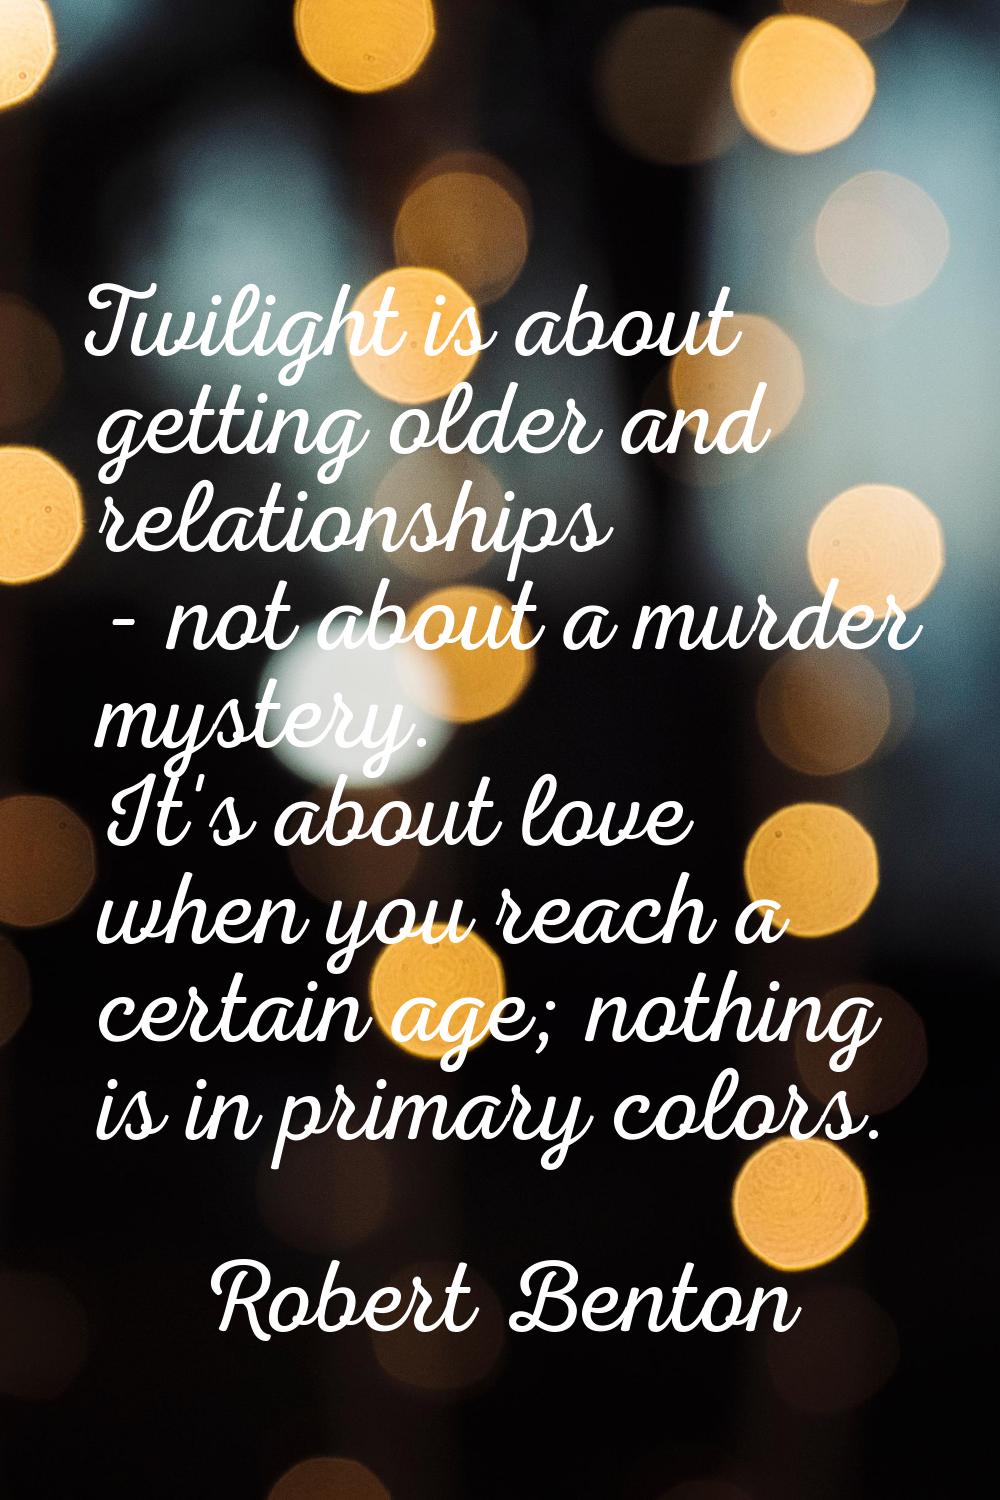 Twilight is about getting older and relationships - not about a murder mystery. It's about love whe